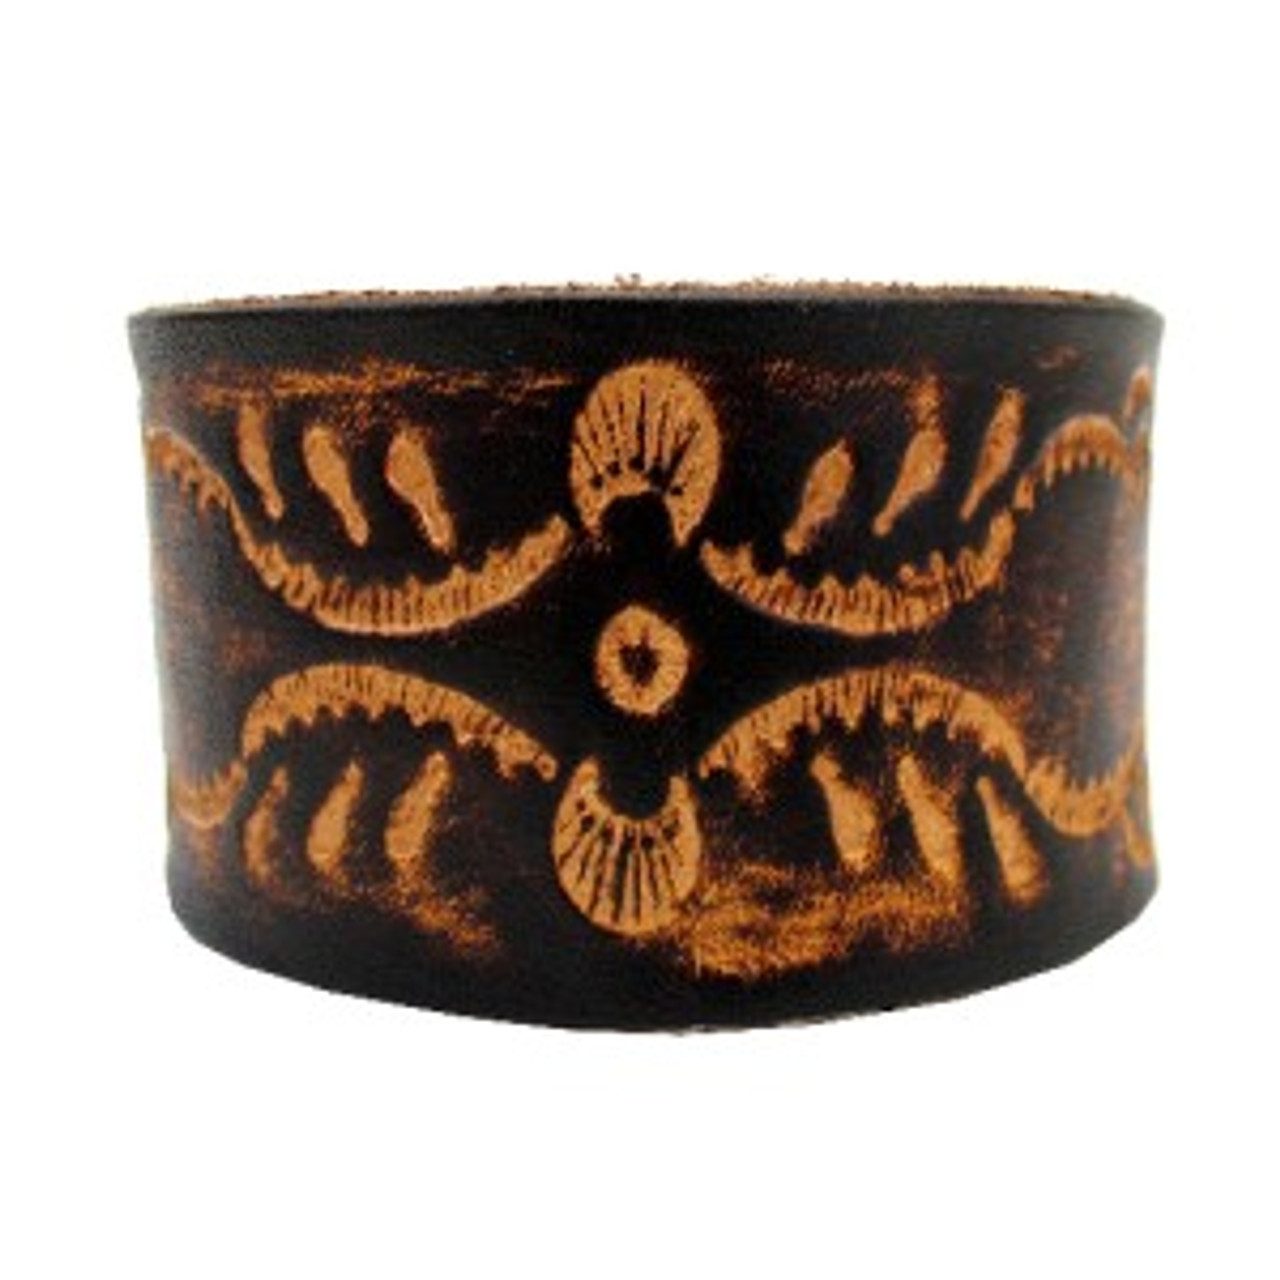 Brown Cuff Leather Bracelet Unisex Embossed Wristband Rock Punk Gothic ...